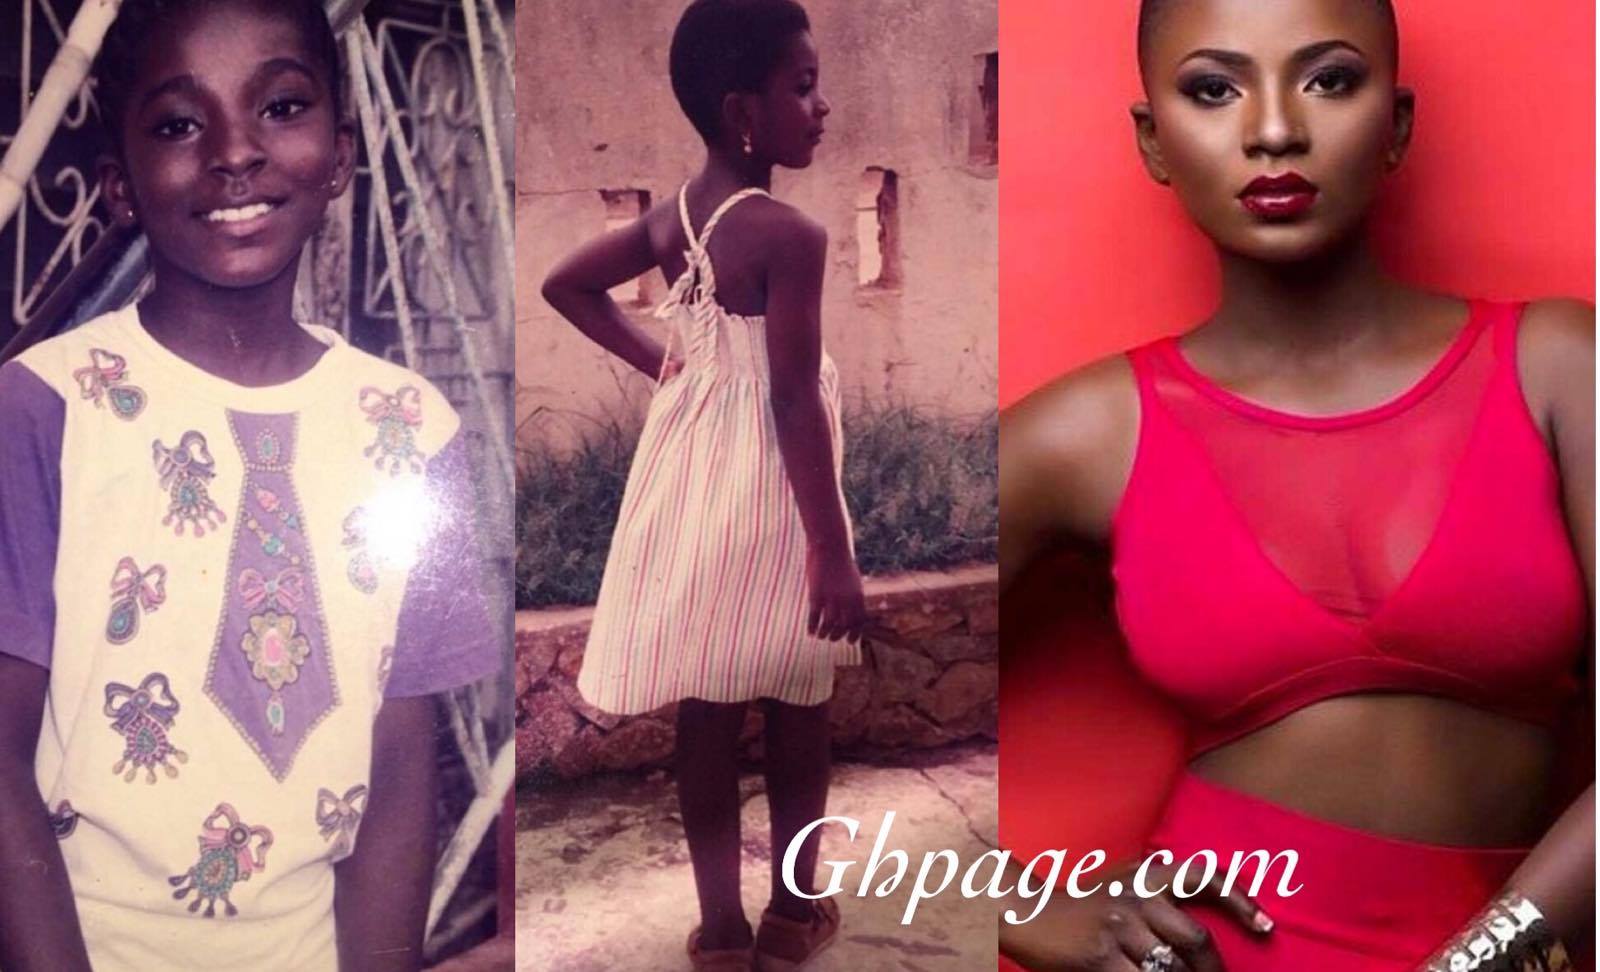 Photos: This Is Ahuof3 Patri Before Fame